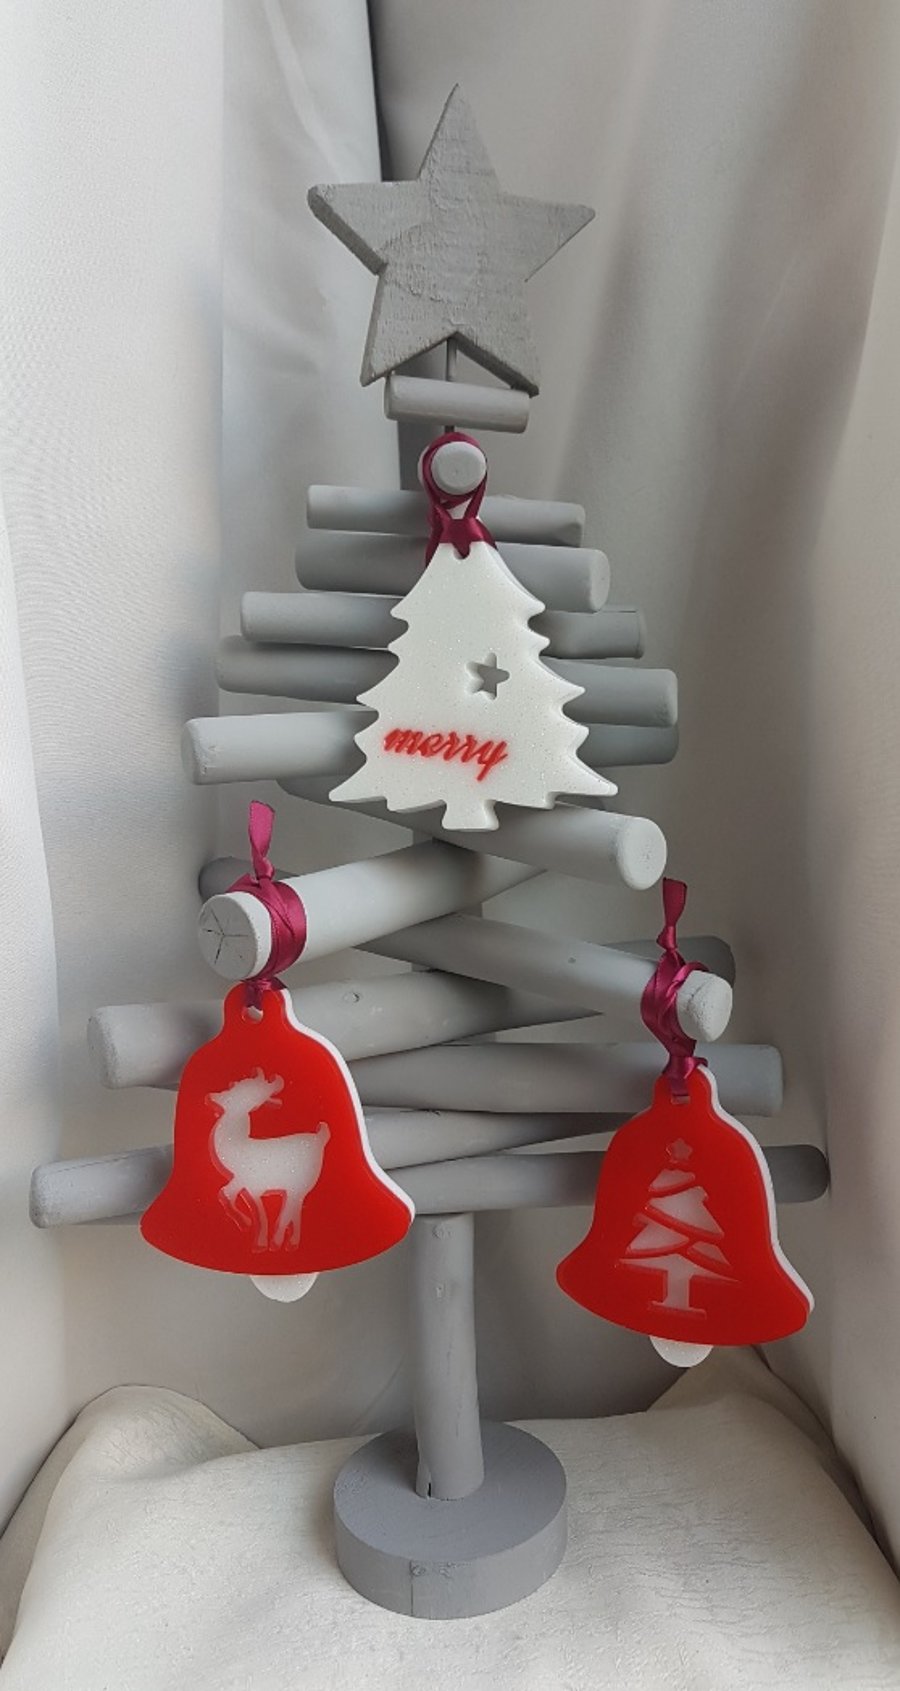 Set of 3 Resin Decorations - Red and Glittery White.